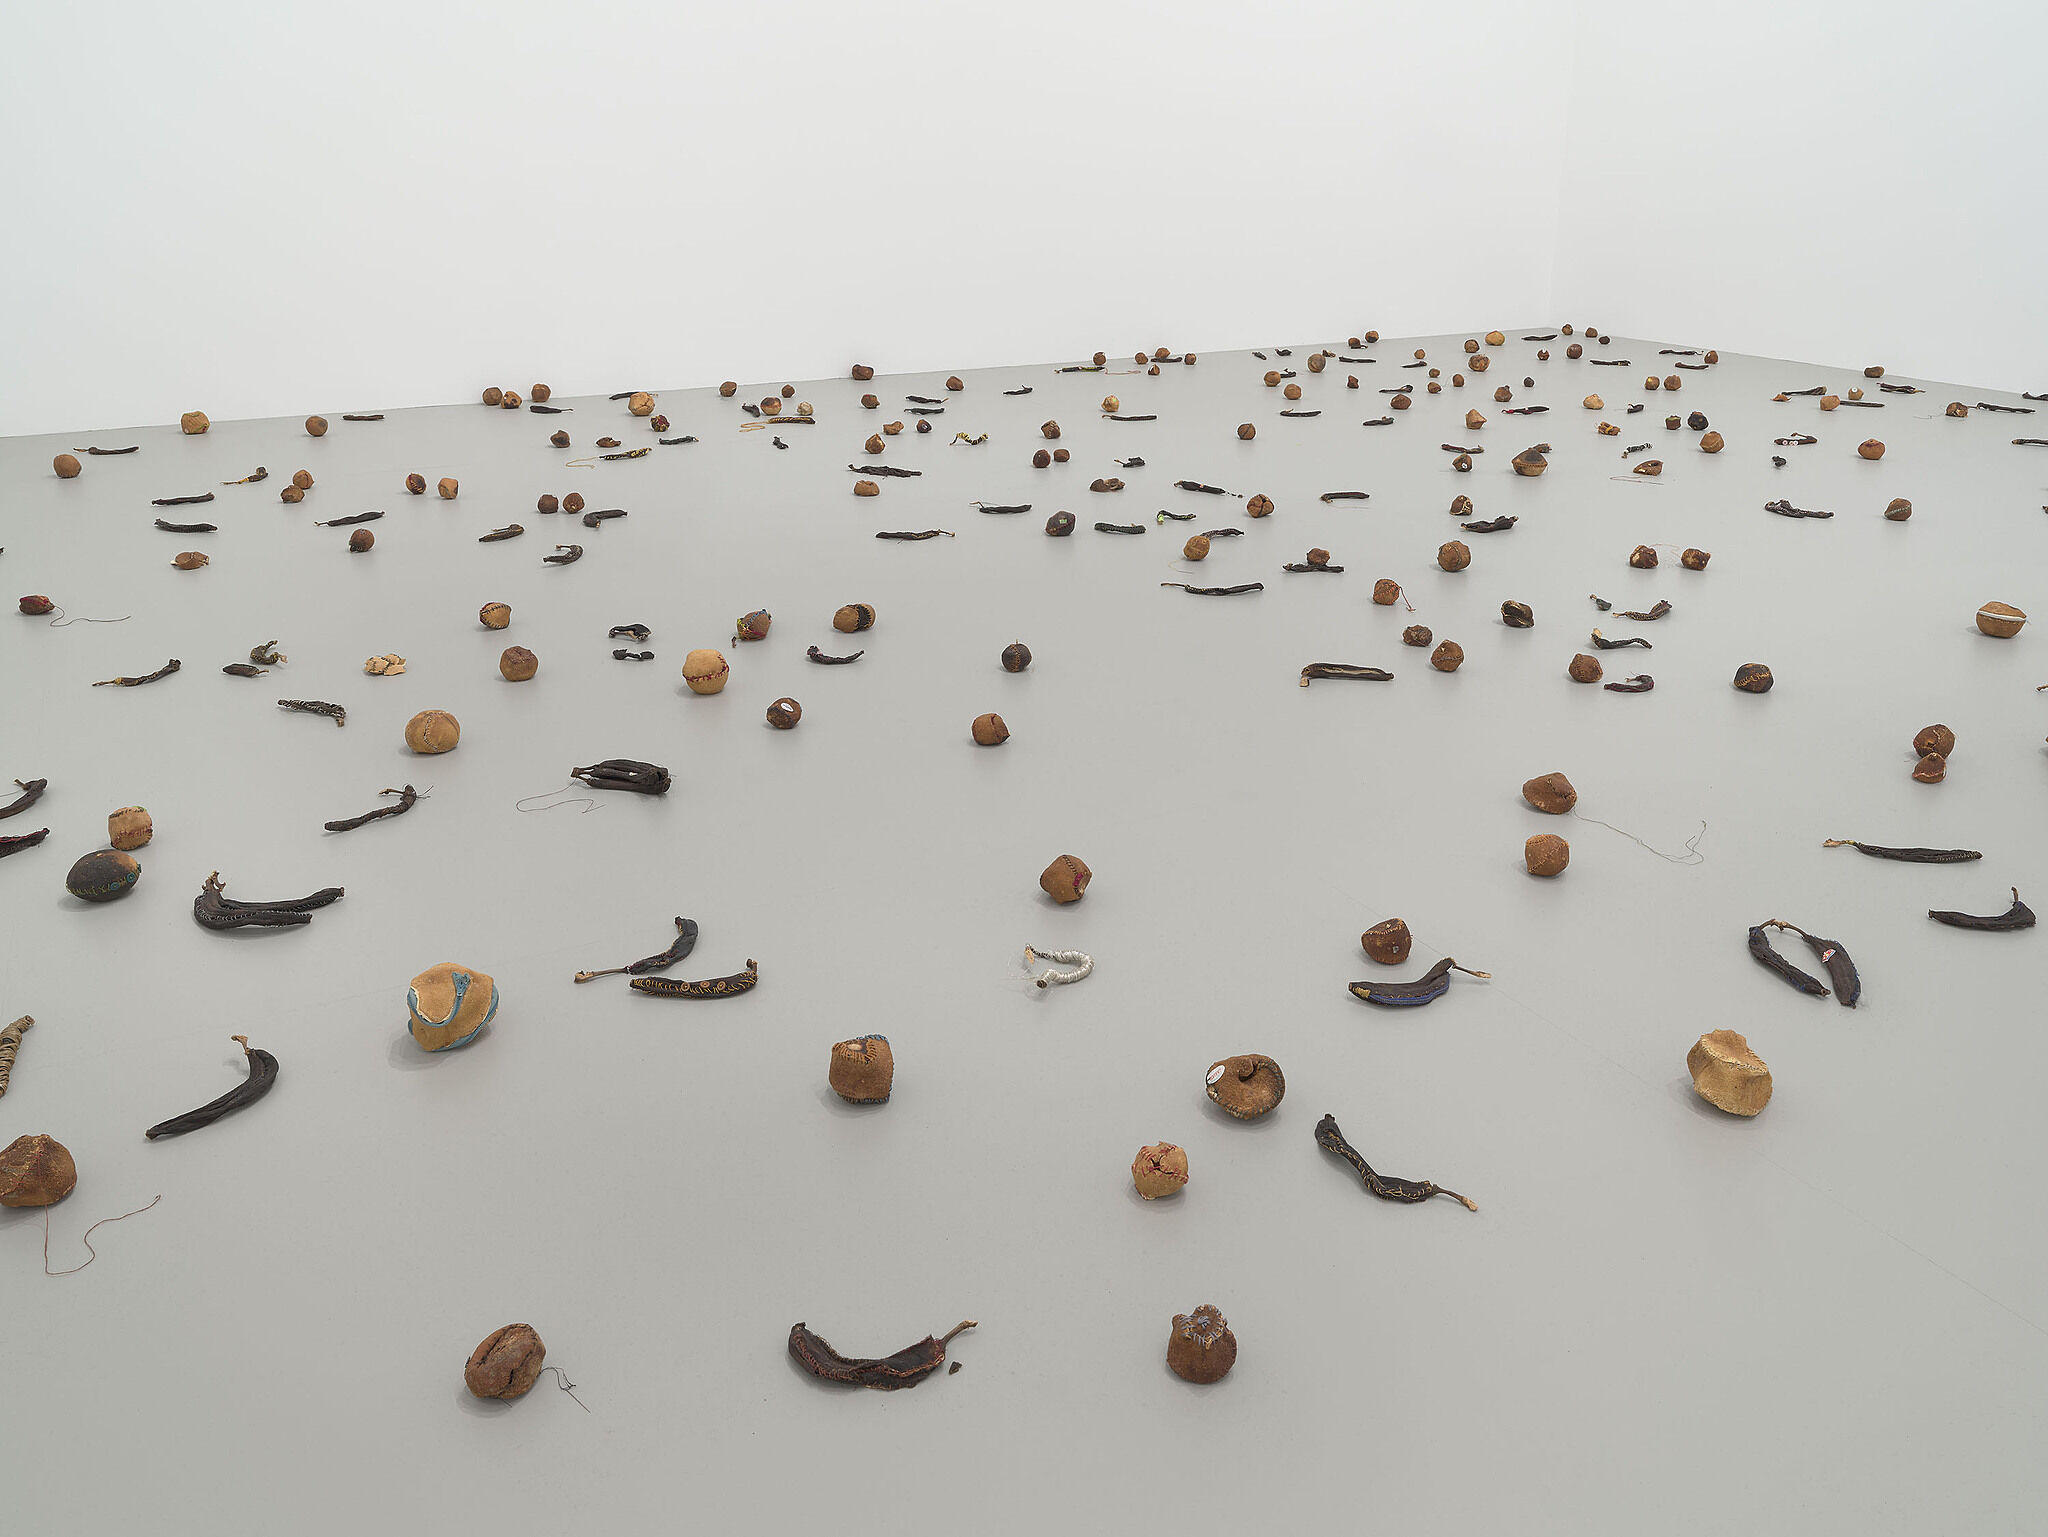 A collection of dried fruits on a gallery floor.